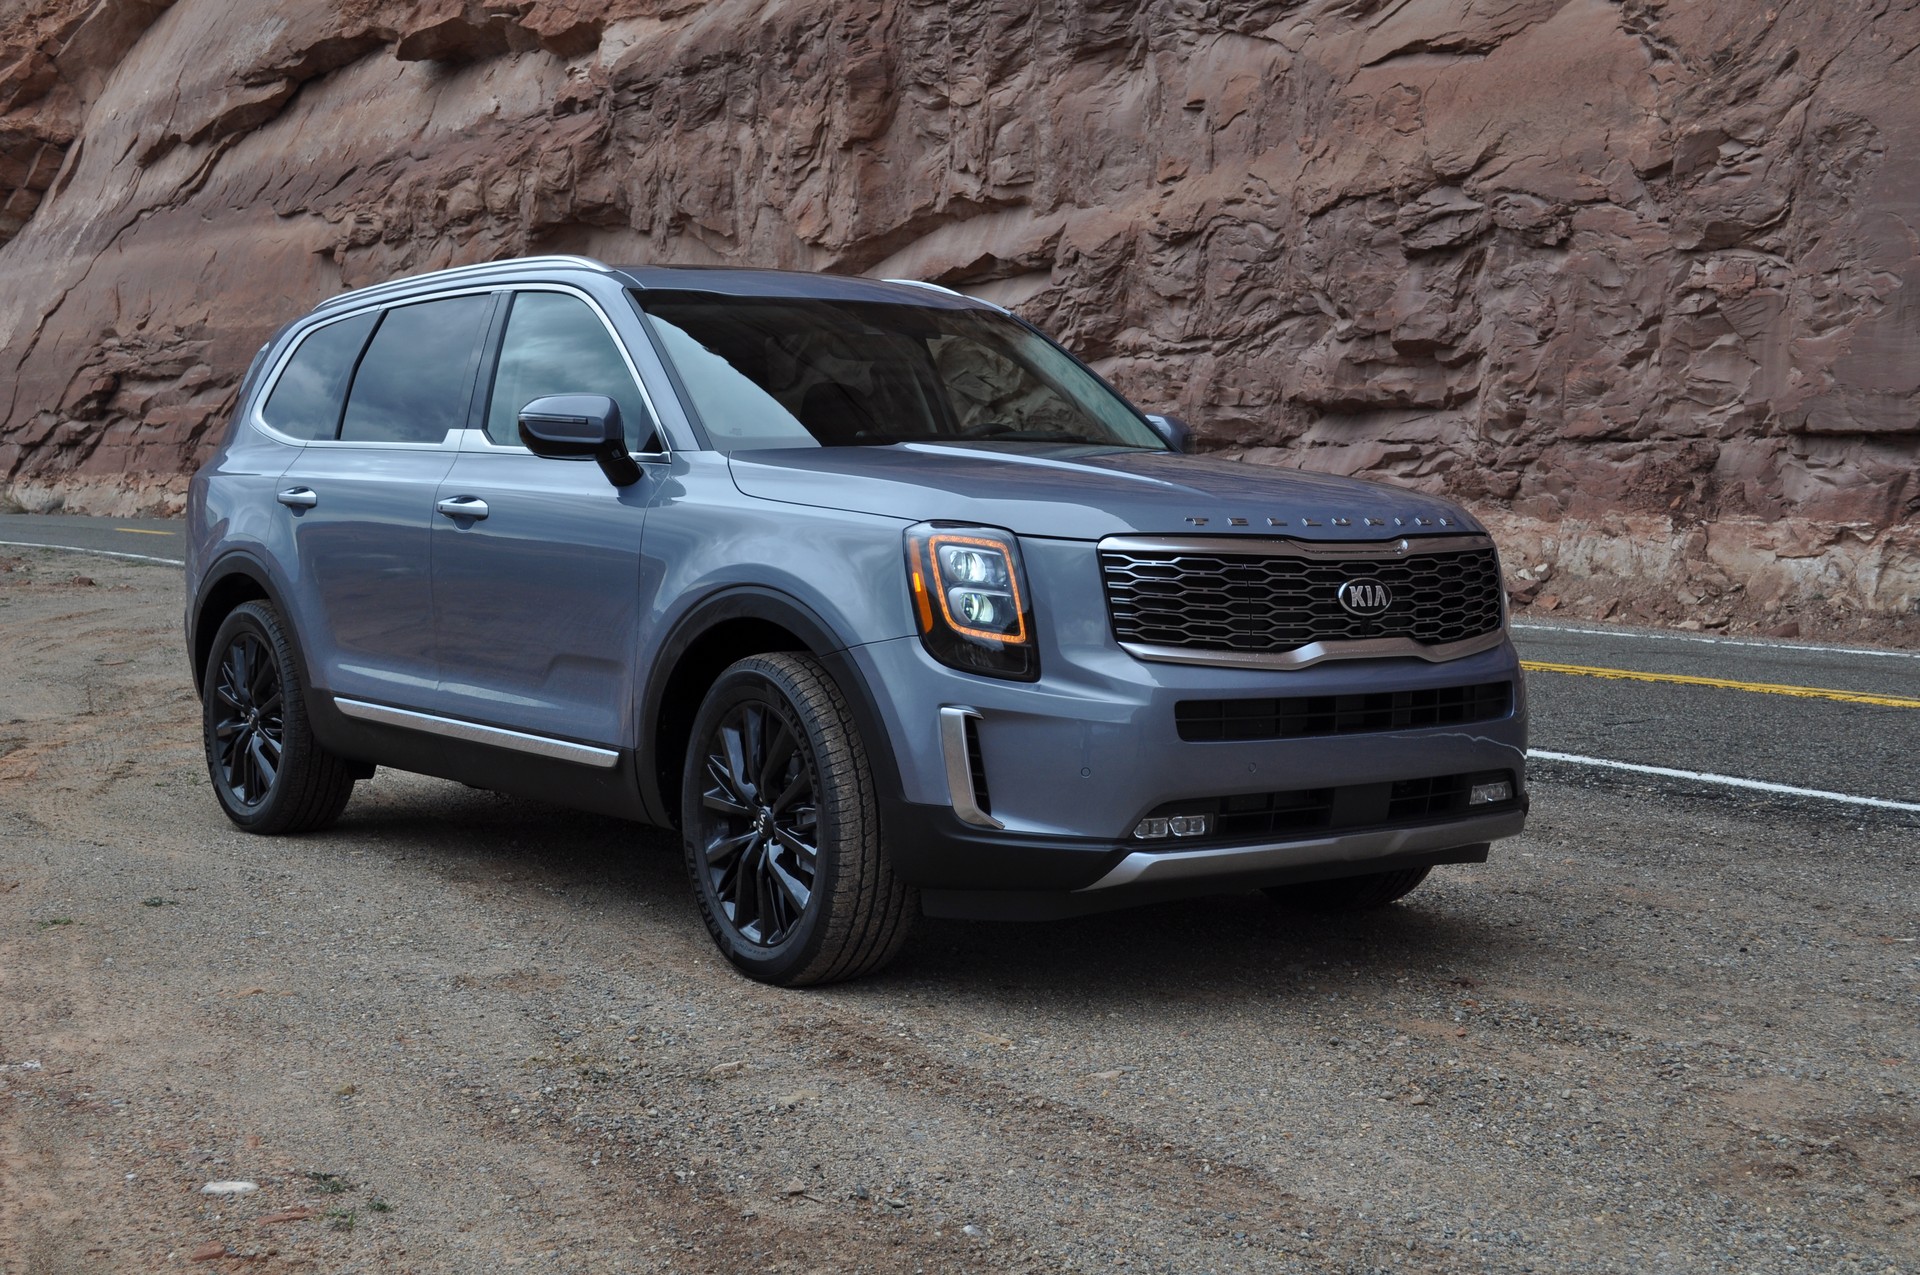 Driven: 2020 Kia Telluride Is Large, Luxurious And Here To Eat The Explorer...